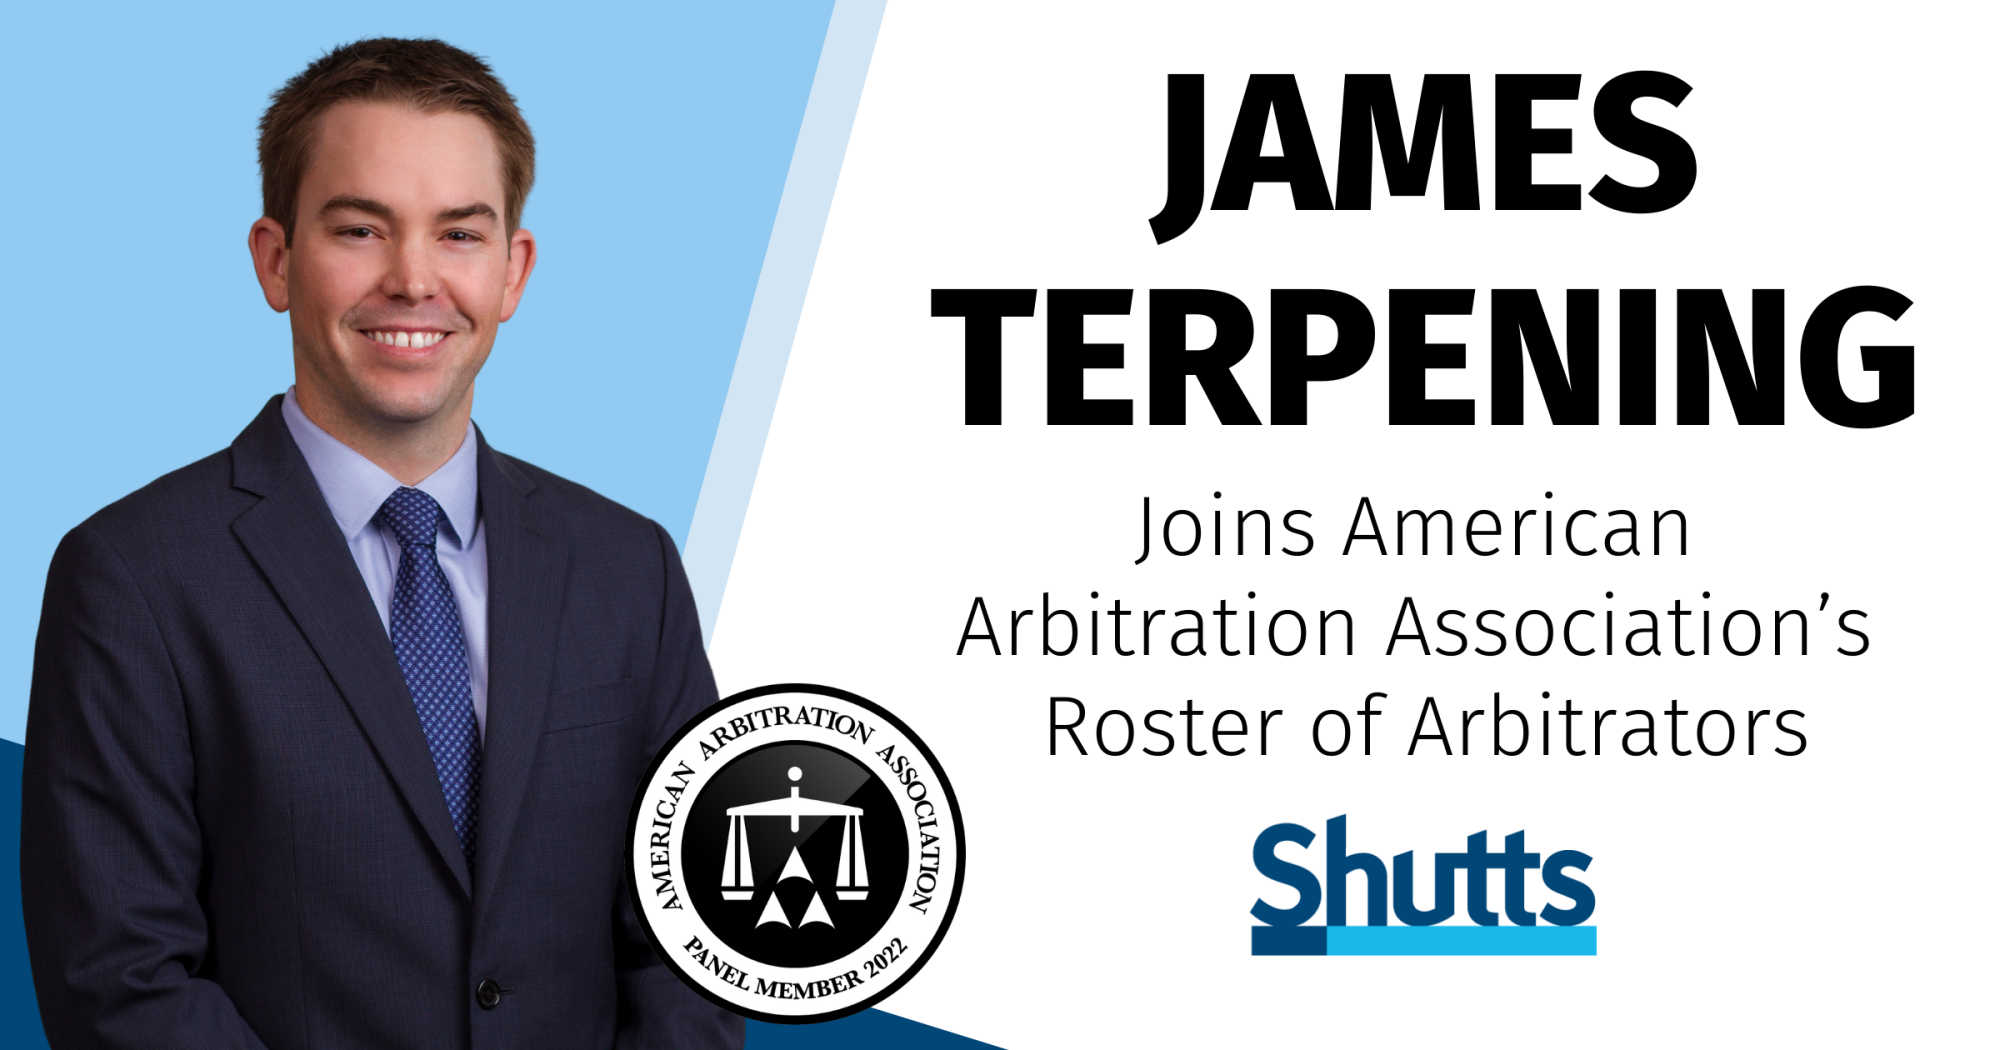 James Terpening Joins American Arbitration Association’s Roster of Arbitrators